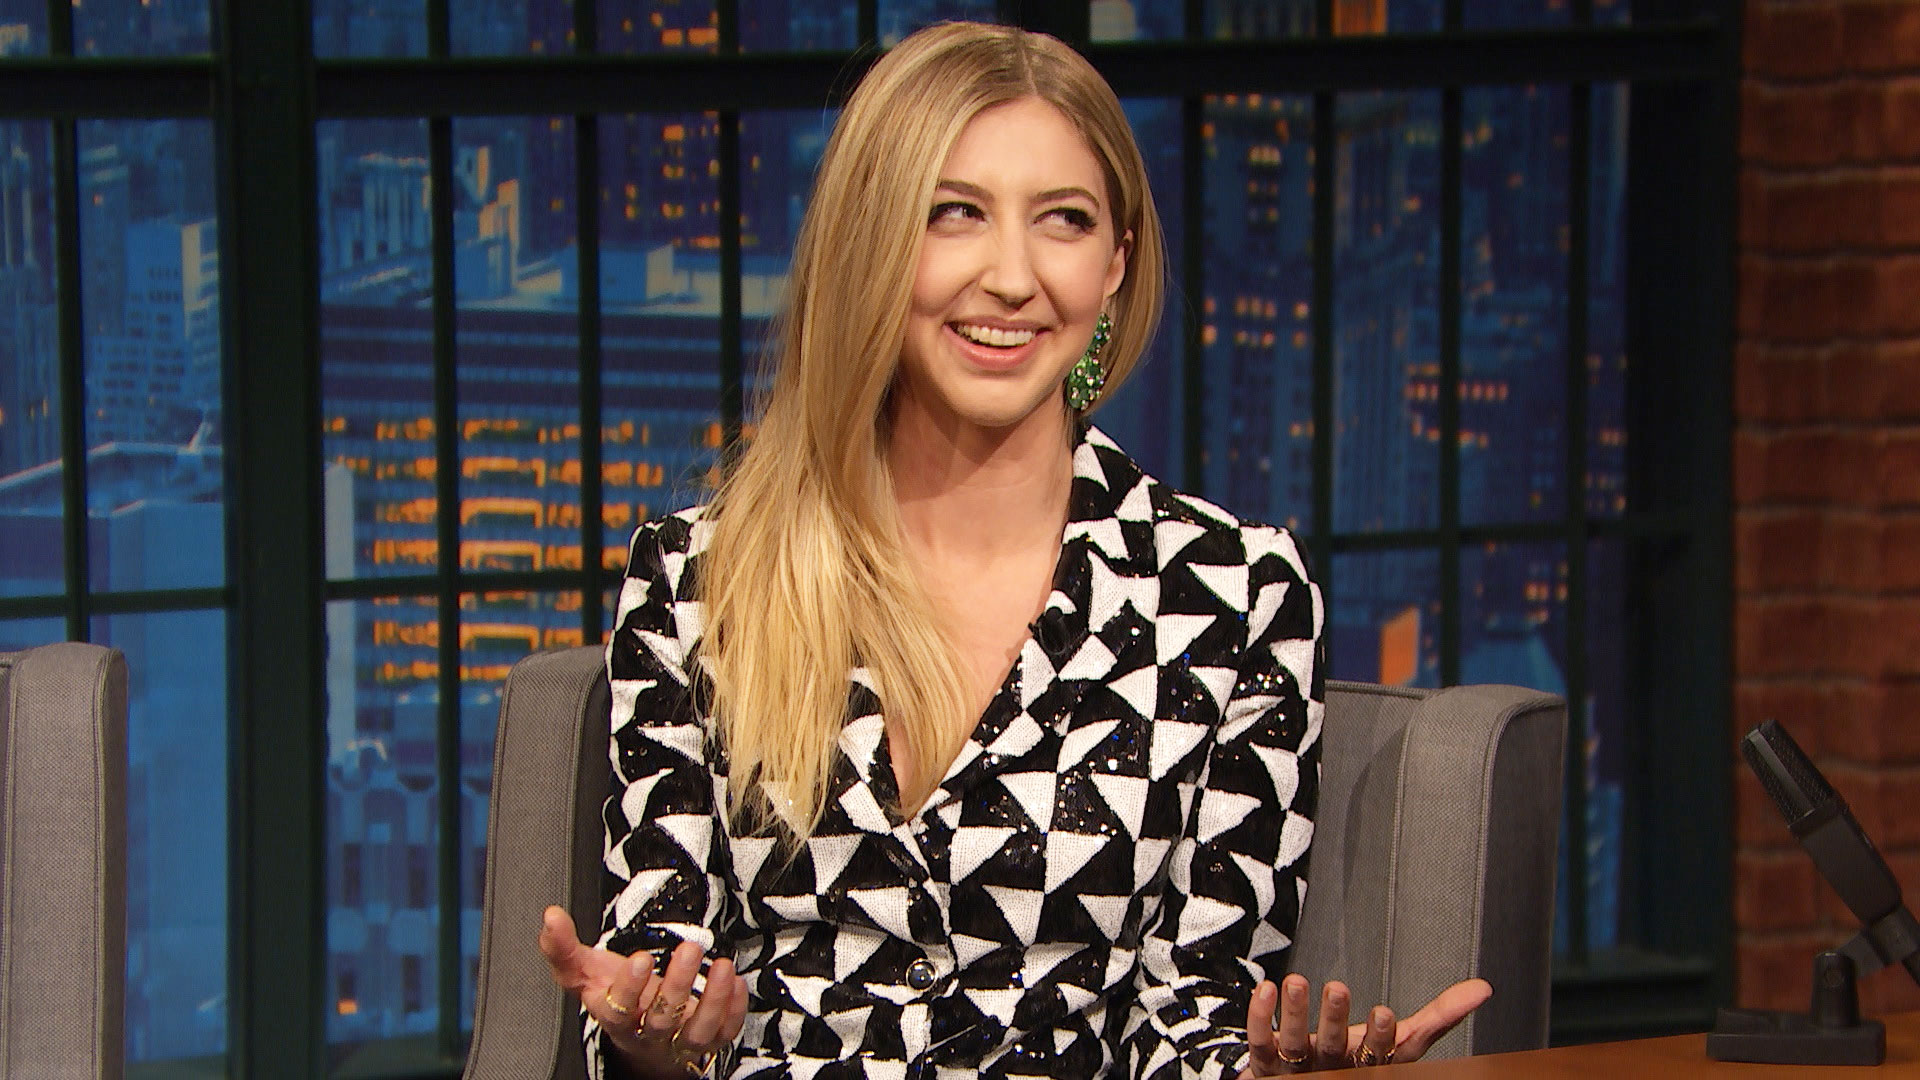 Watch Late Night with Seth Meyers Interview: Heidi Gardner Worked as a Hair...